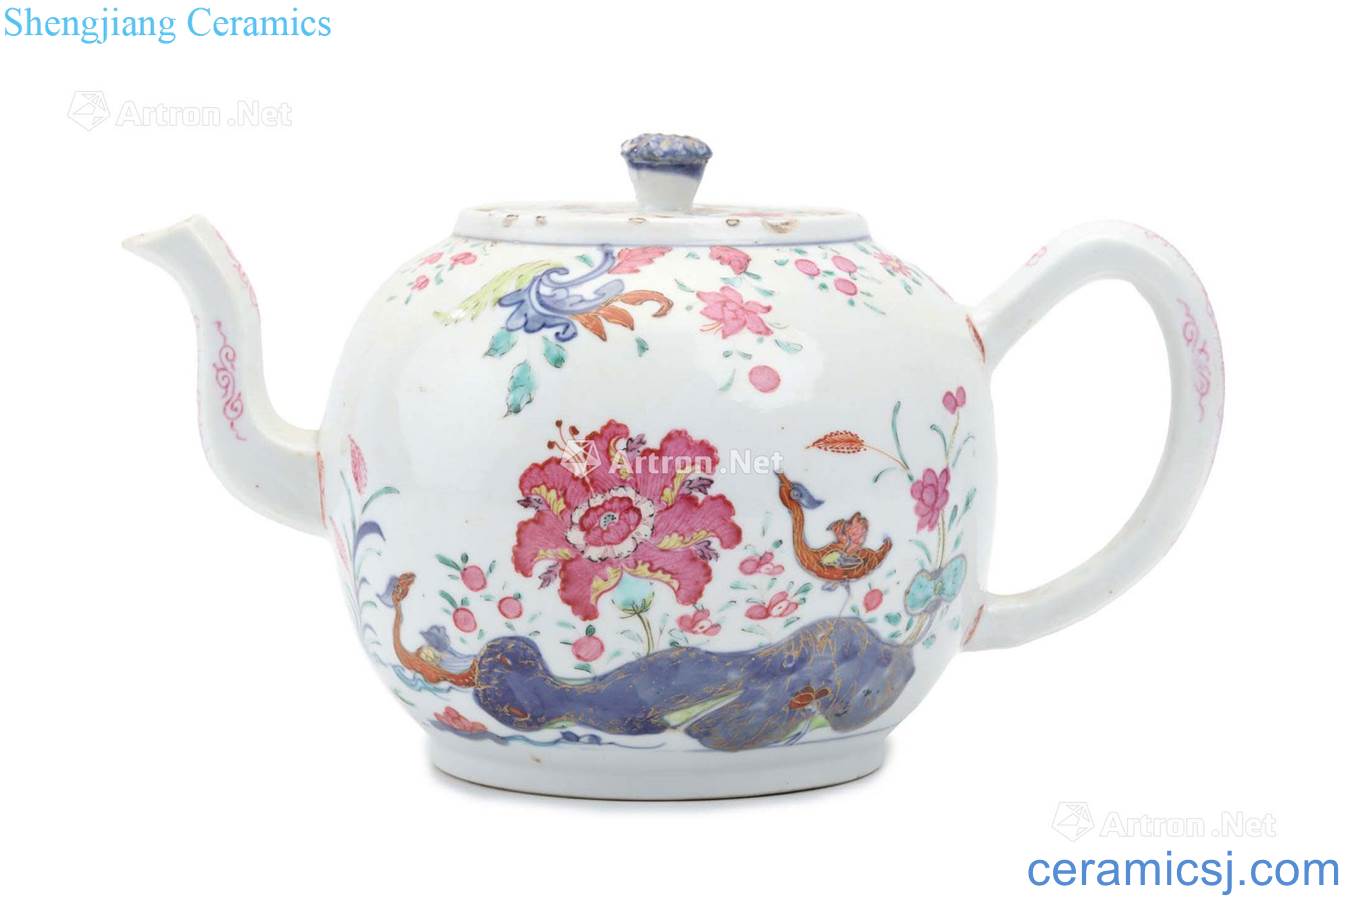 Qing dynasty in the 18th century pastel tobacco lines and cover the teapot